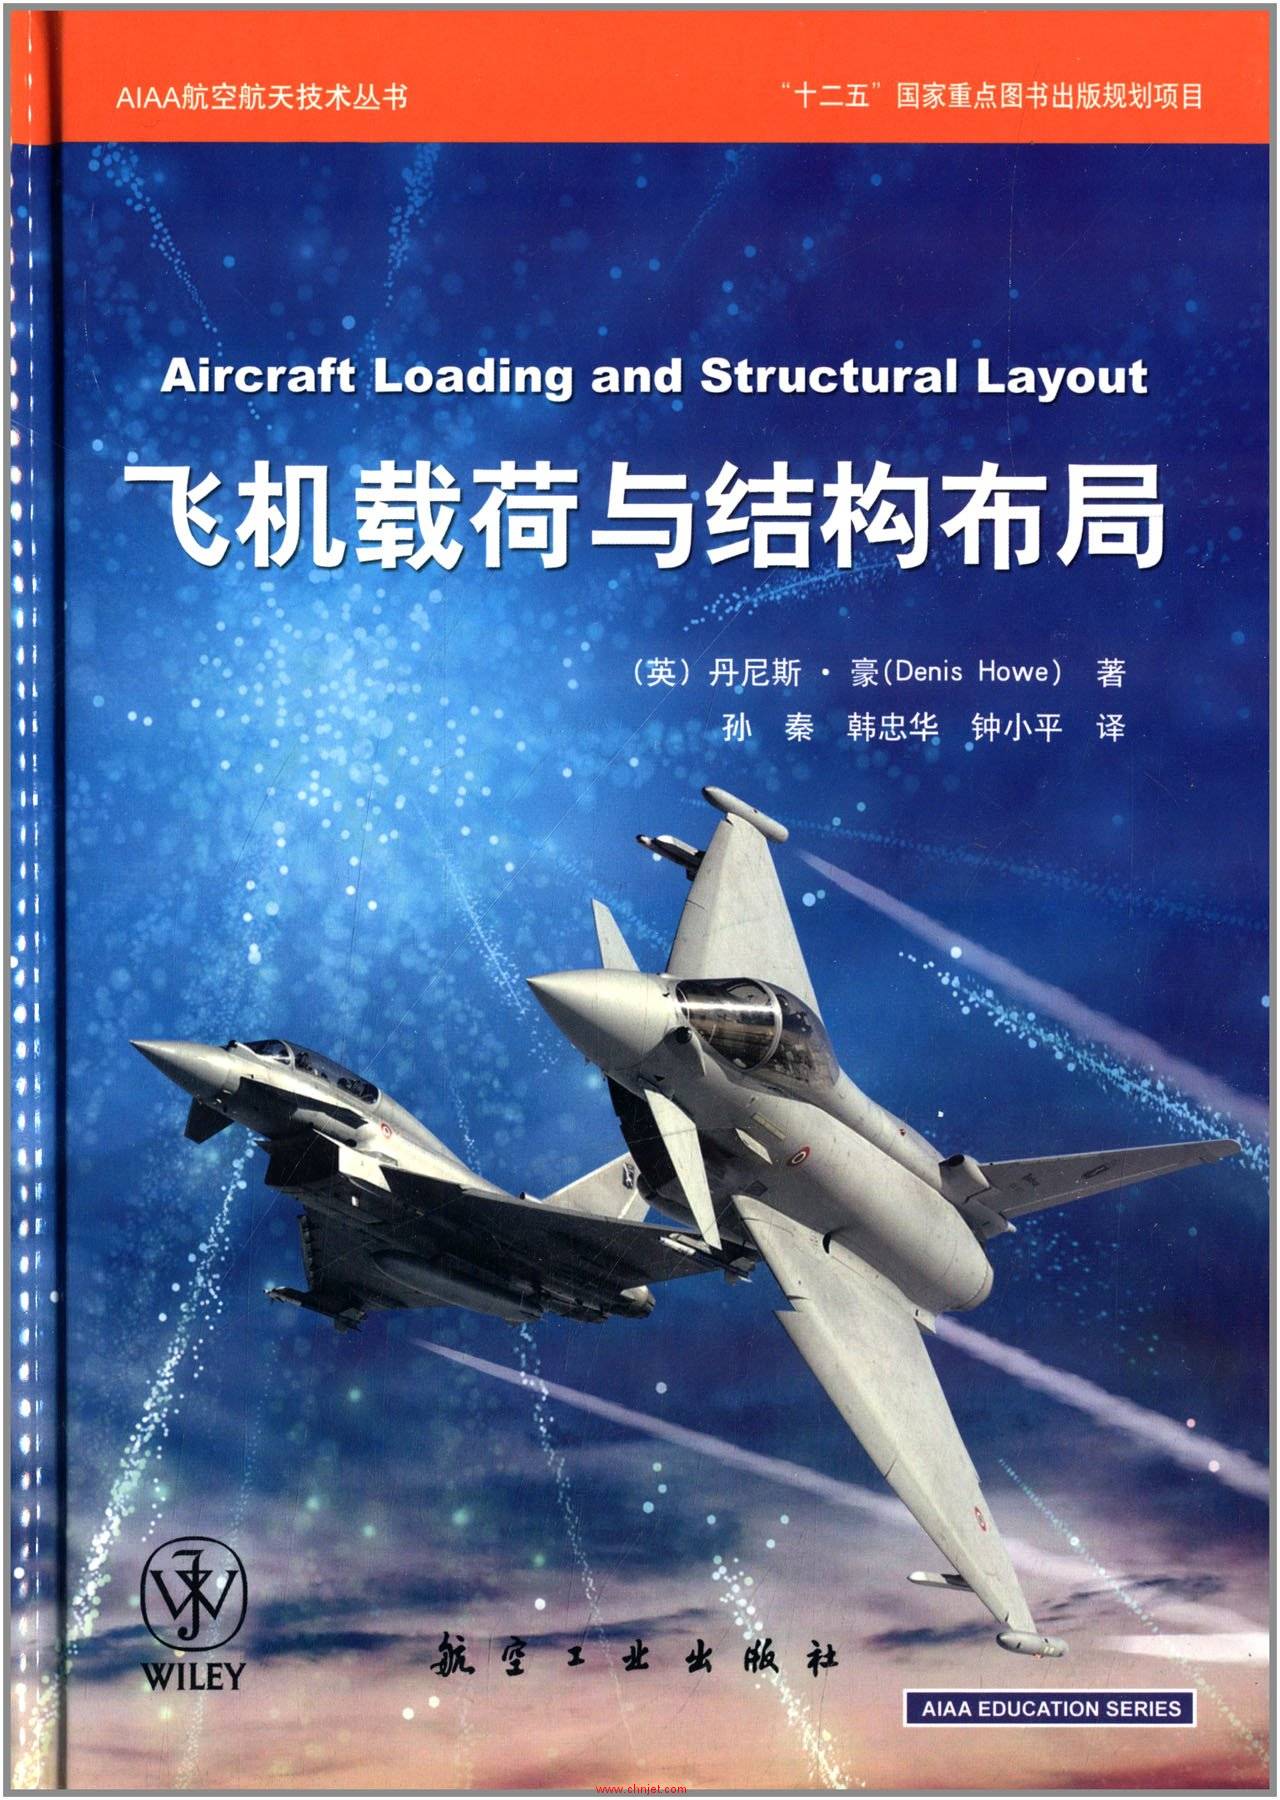 《Aircraft Loading and Structural Layout》